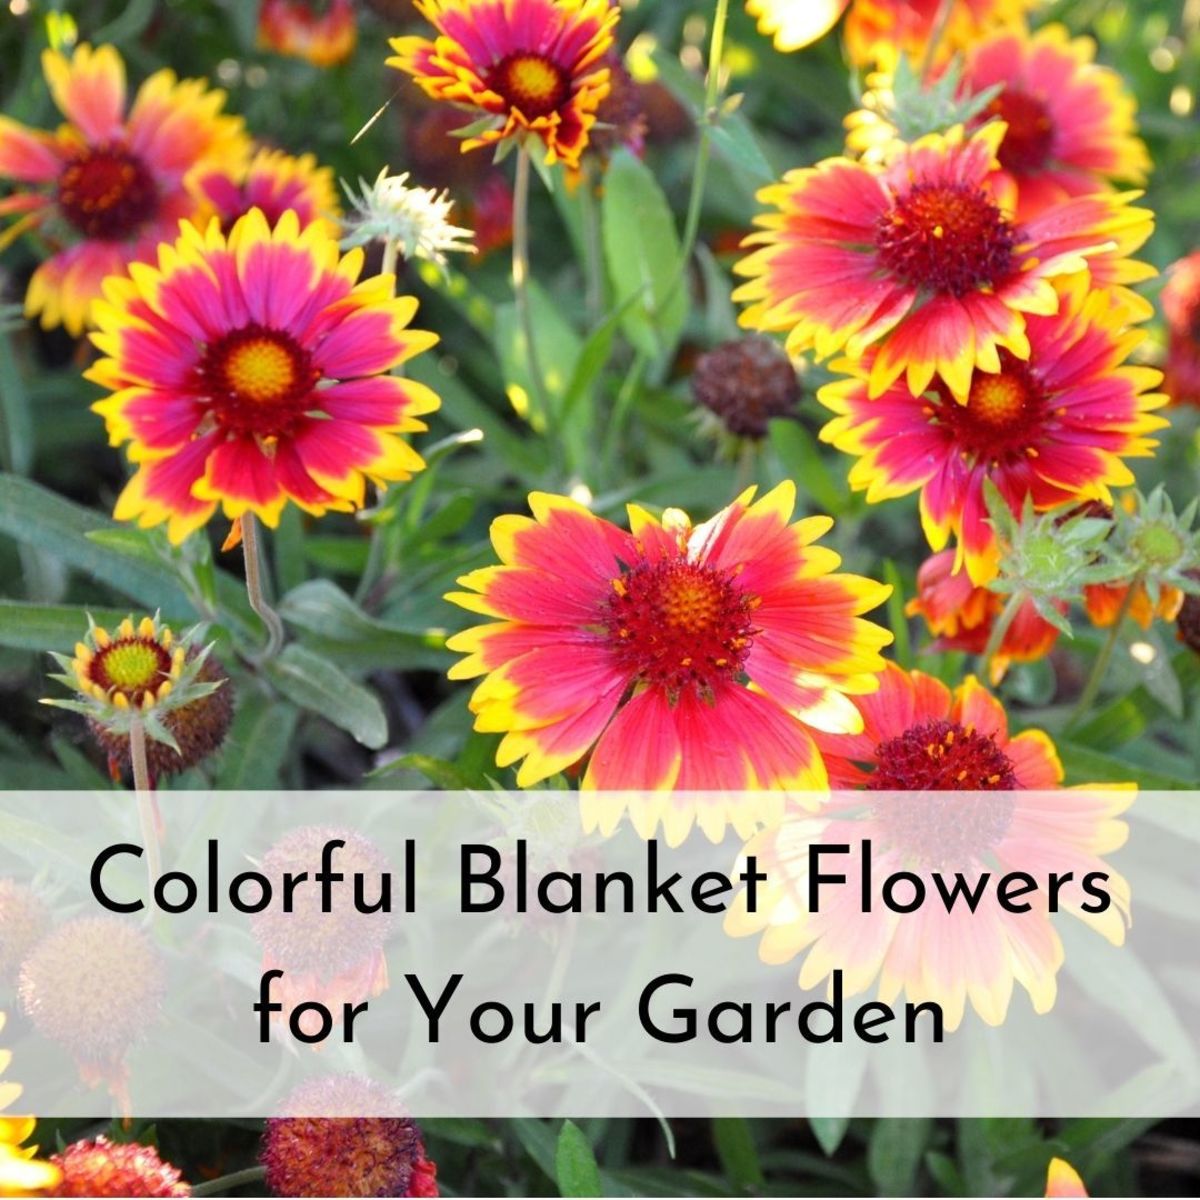 Blanket flowers are easy to grow from seeds and double their beauty by attracting butterflies. 